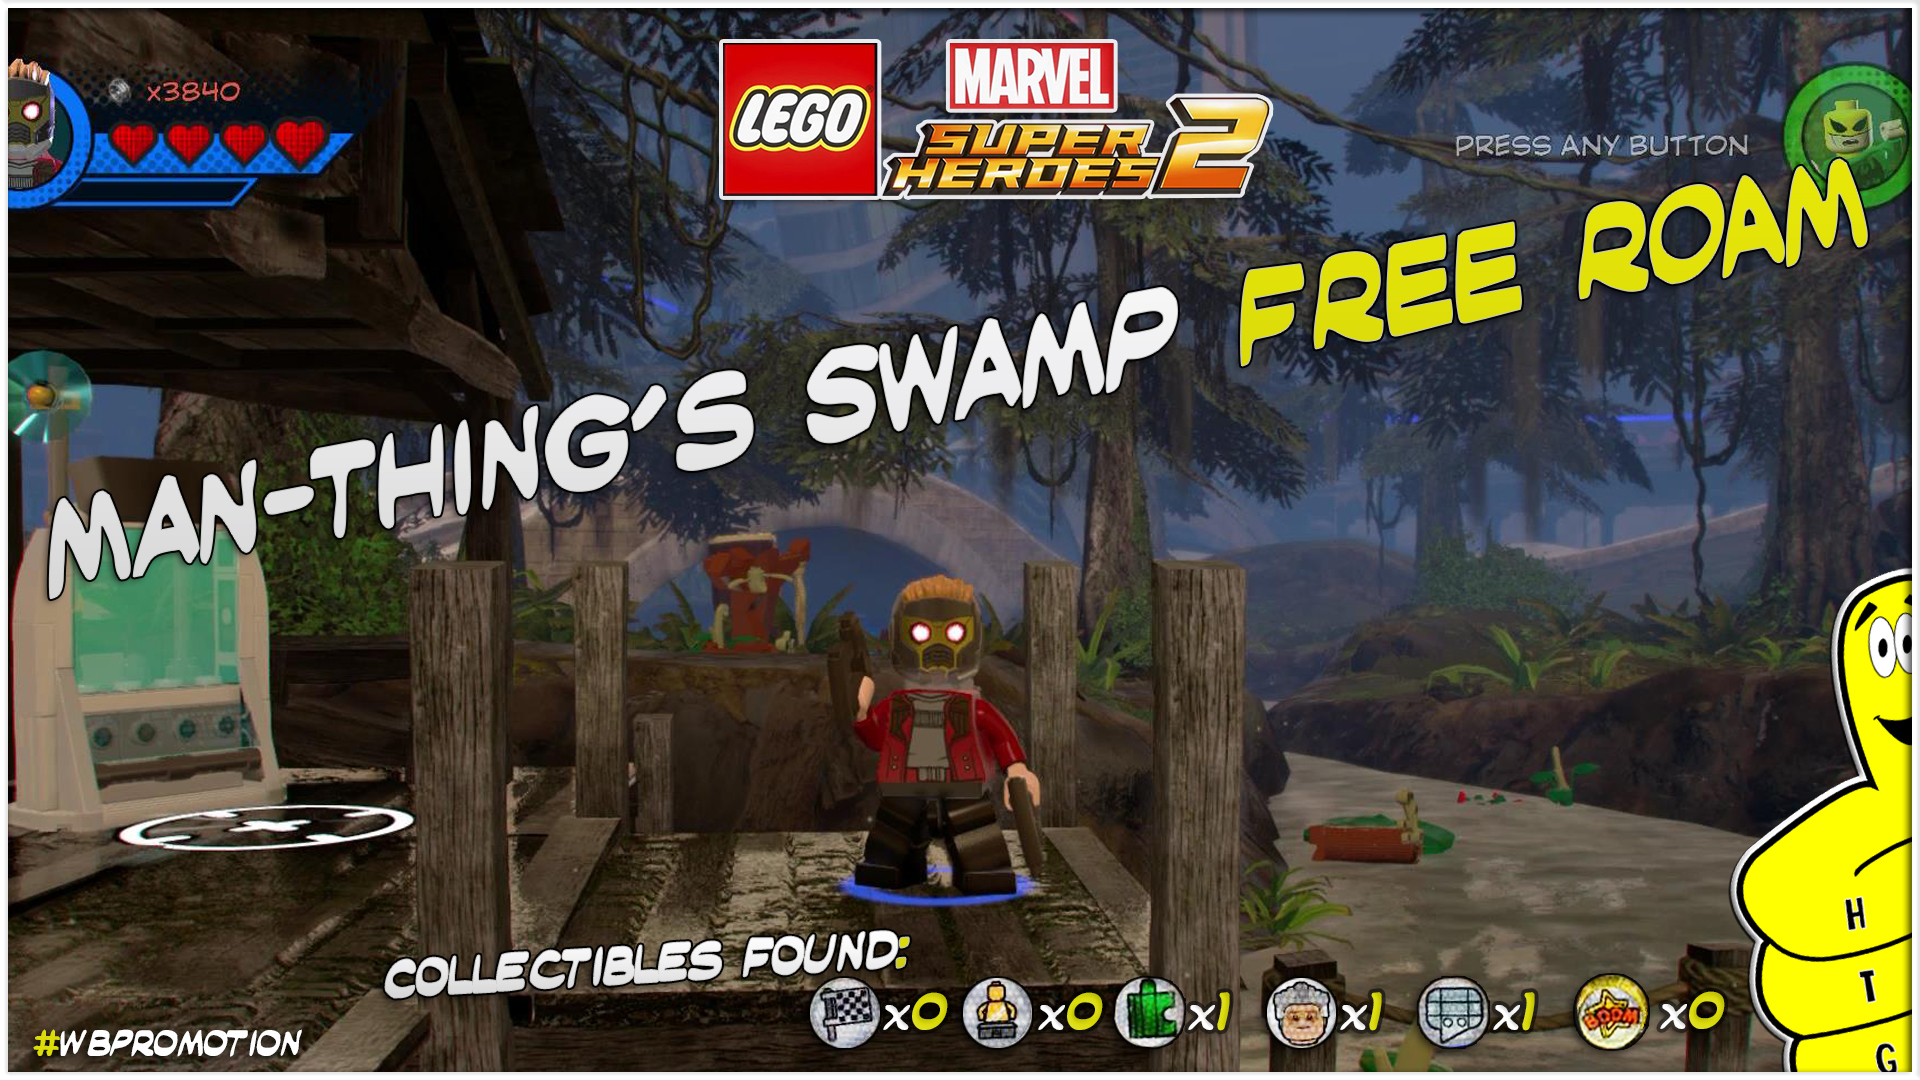 Lego Marvel Superheroes 2: Man-Thing’s Swamp FREE ROAM (All Collectibles) – HTG